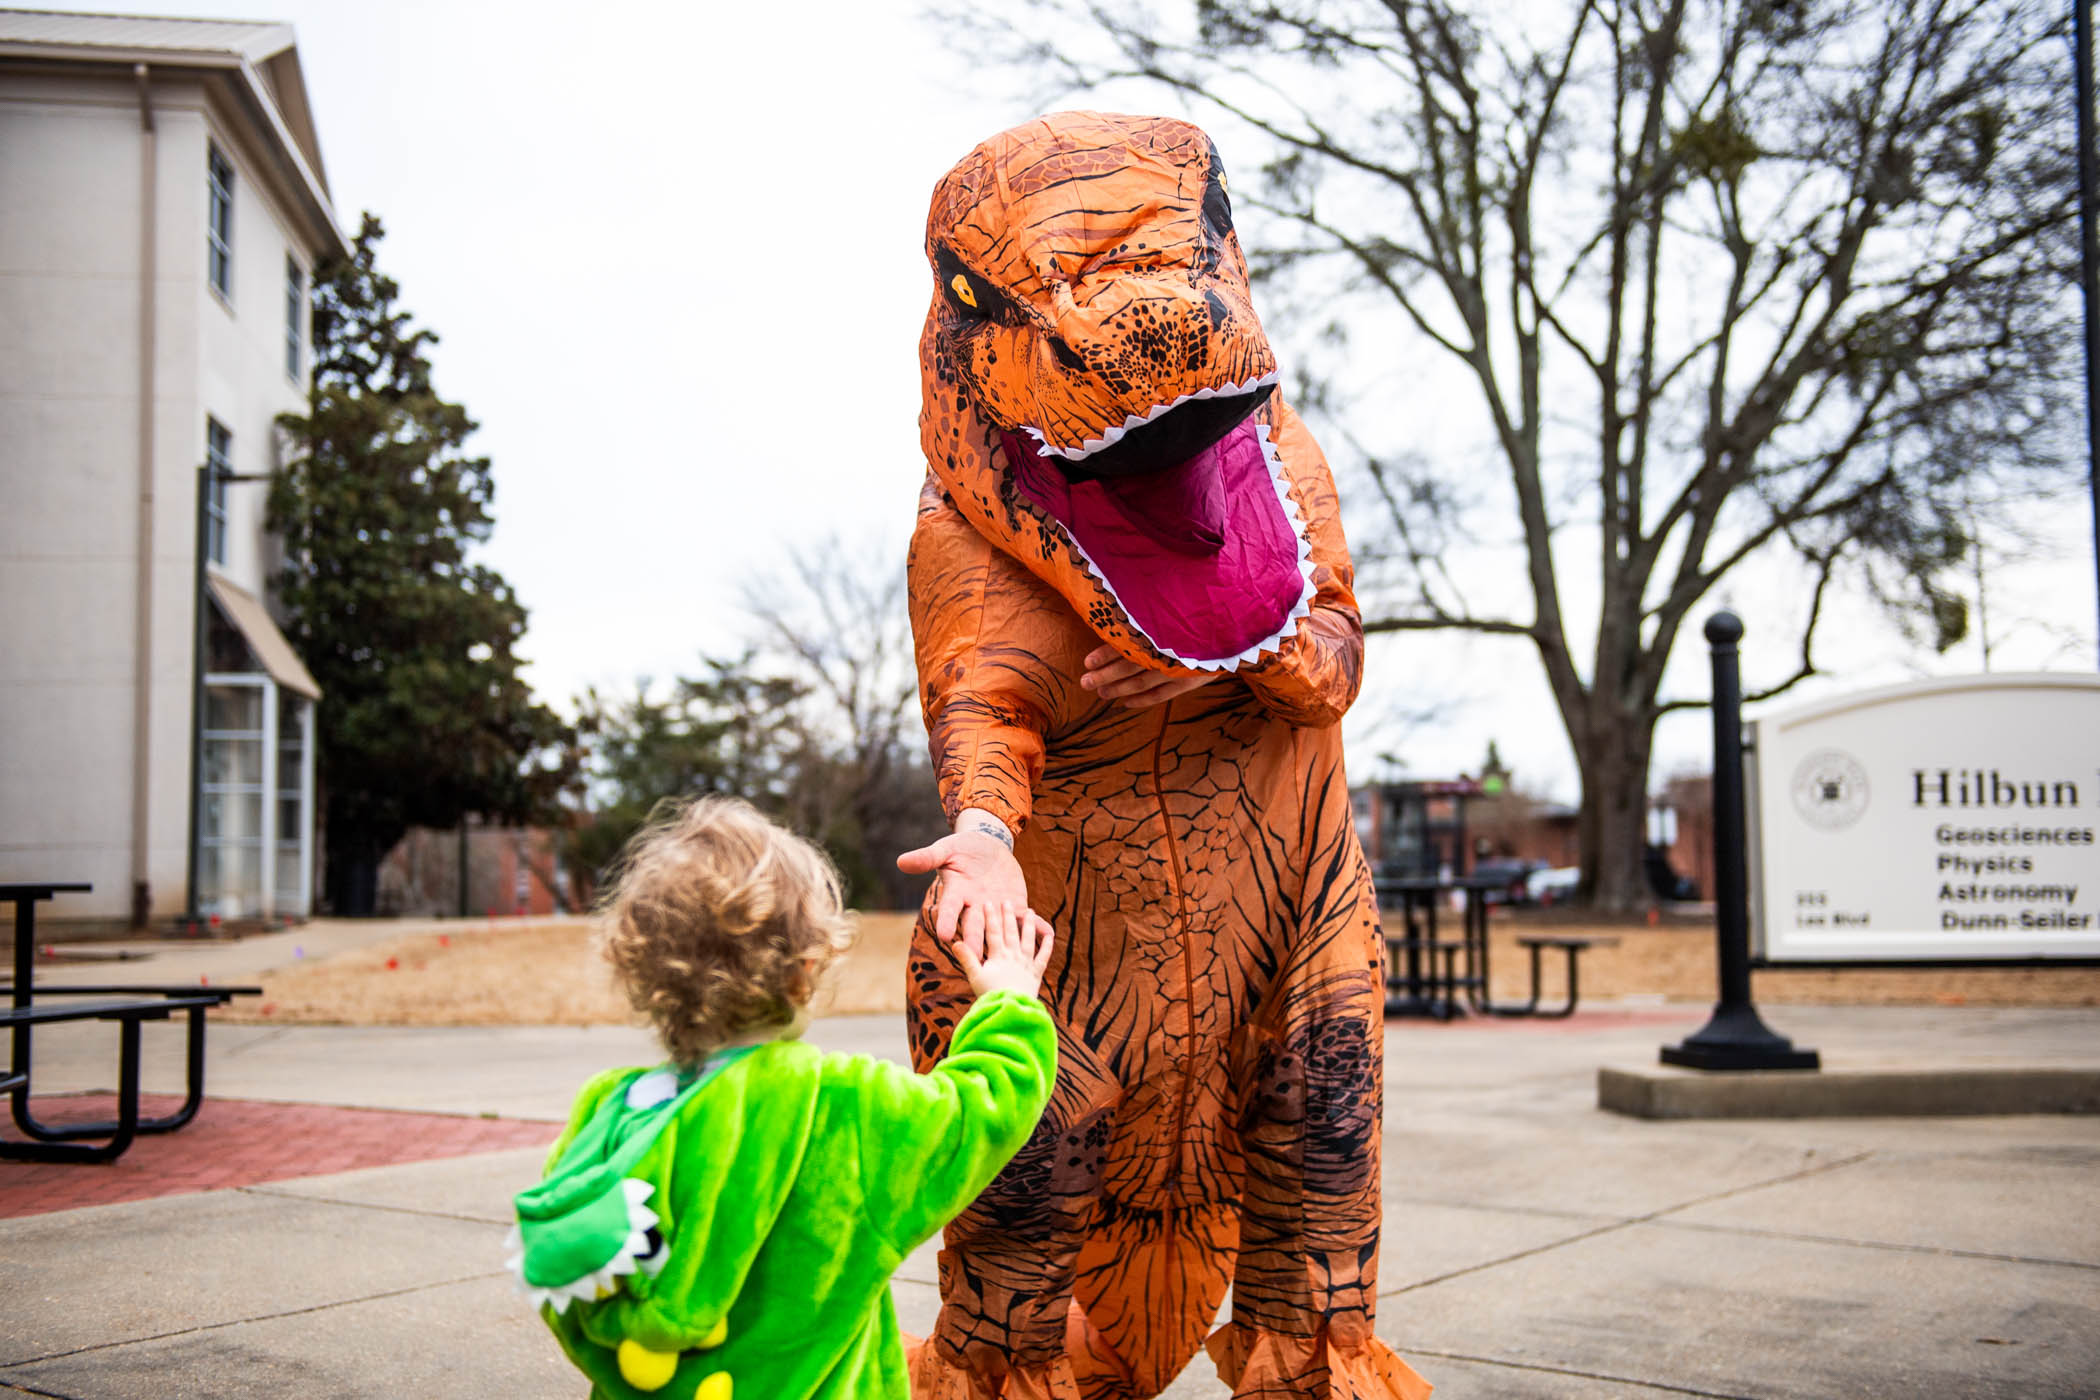 Jamie, a one-year-old explorer from Starkville, high-fives a &quot;T-Rex&quot; at 爱爱直播&#039;s annual &quot;Science Night at the Museums.&quot; Held at Hilbun Hall and Cobb Institute of Archaeology, this engaging event welcomed participants to fascinating exhibits and hands-on activities centered around the wonders of science.